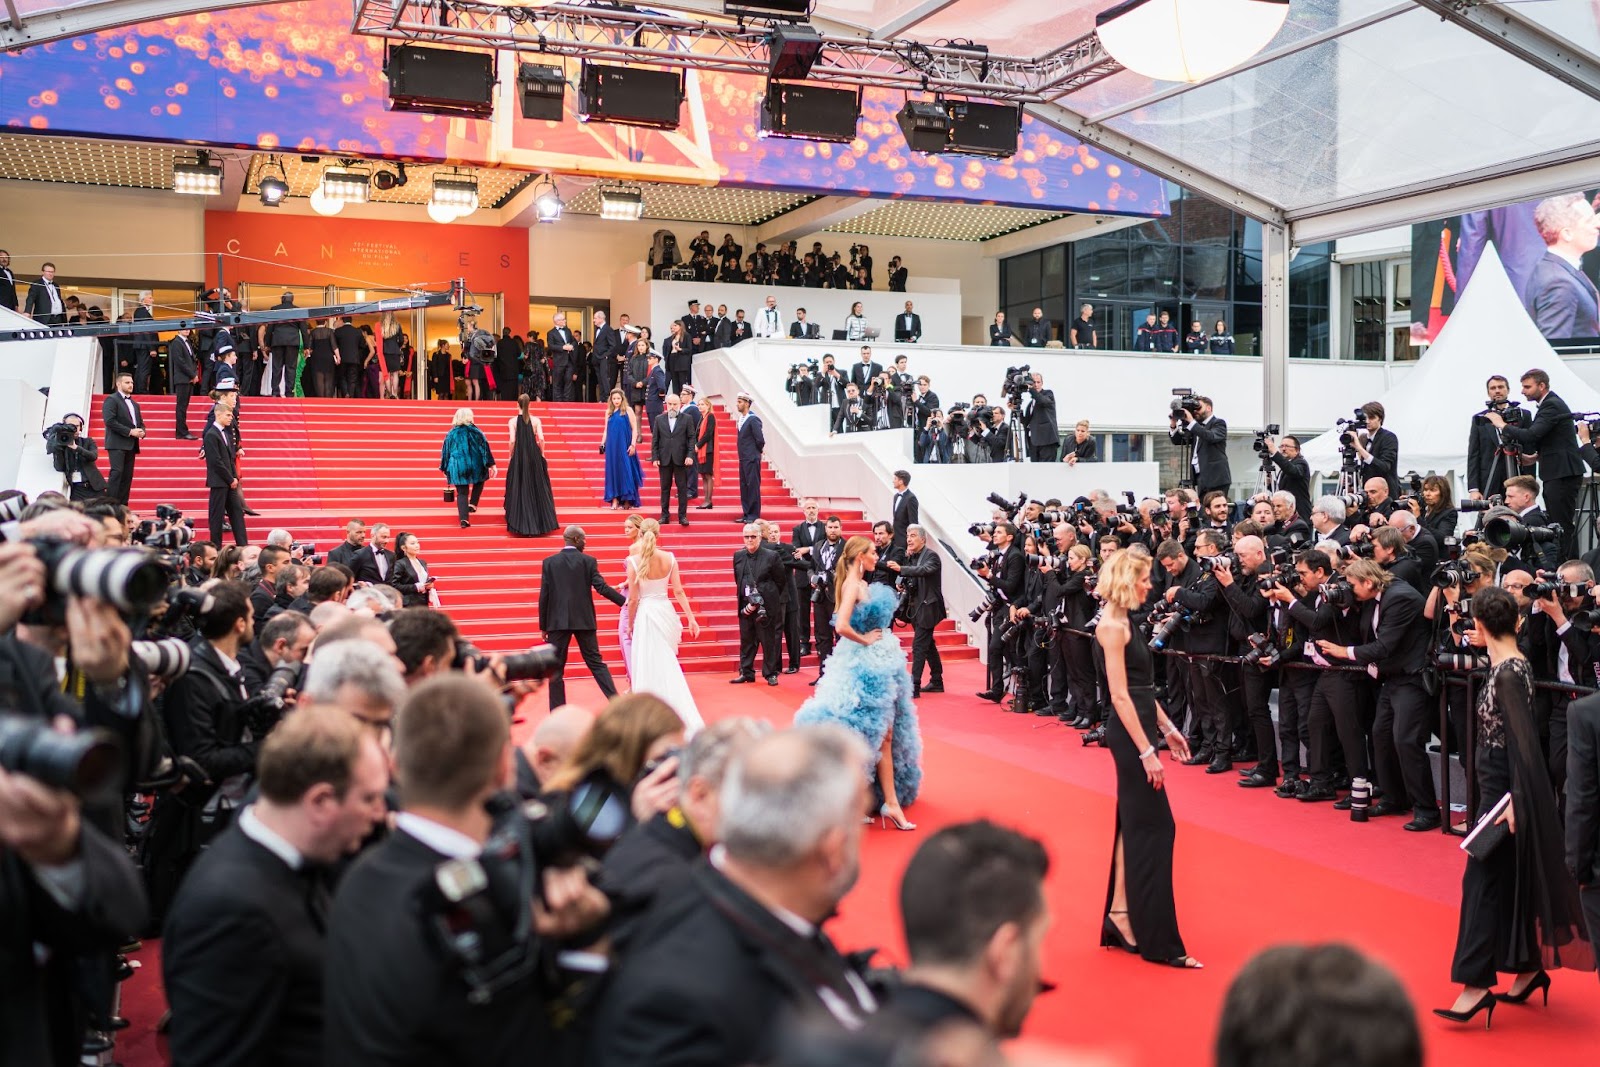 Fire Up Your Love of Cinema at the Cannes Film Festival